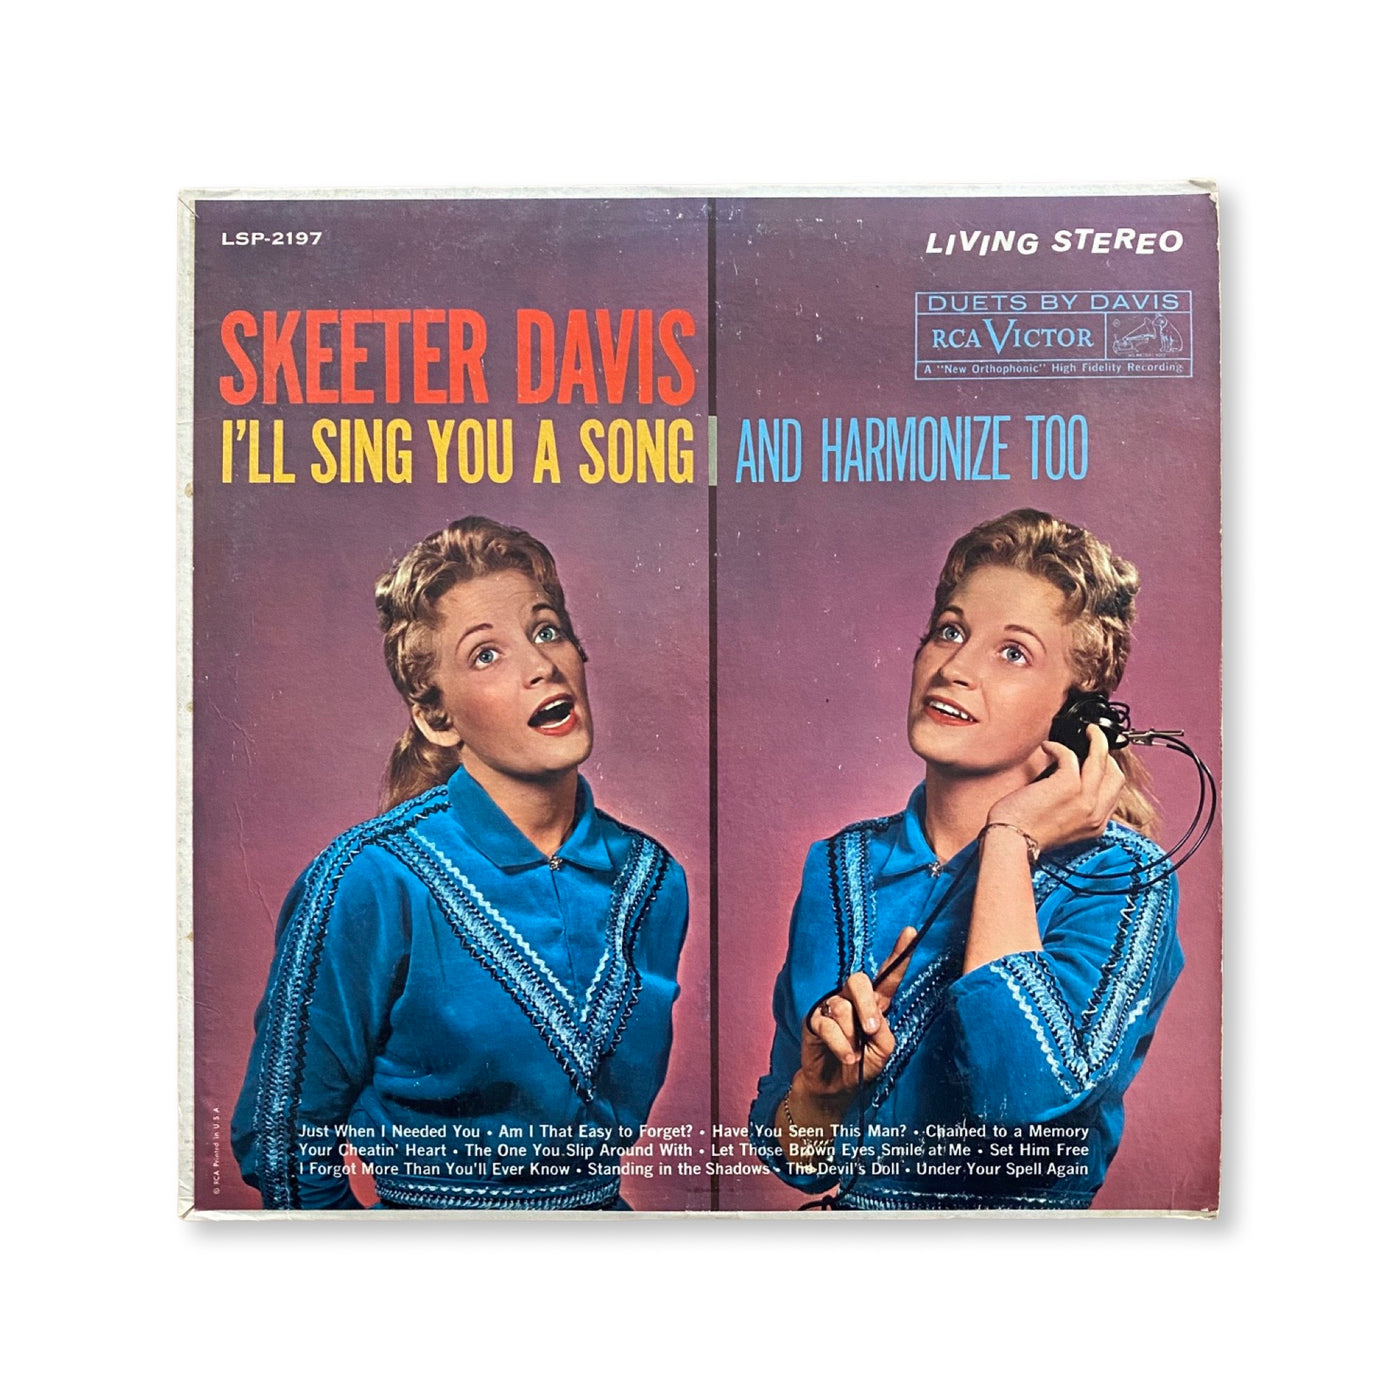 Skeeter Davis - I'll Sing You A Song And Harmonize Too